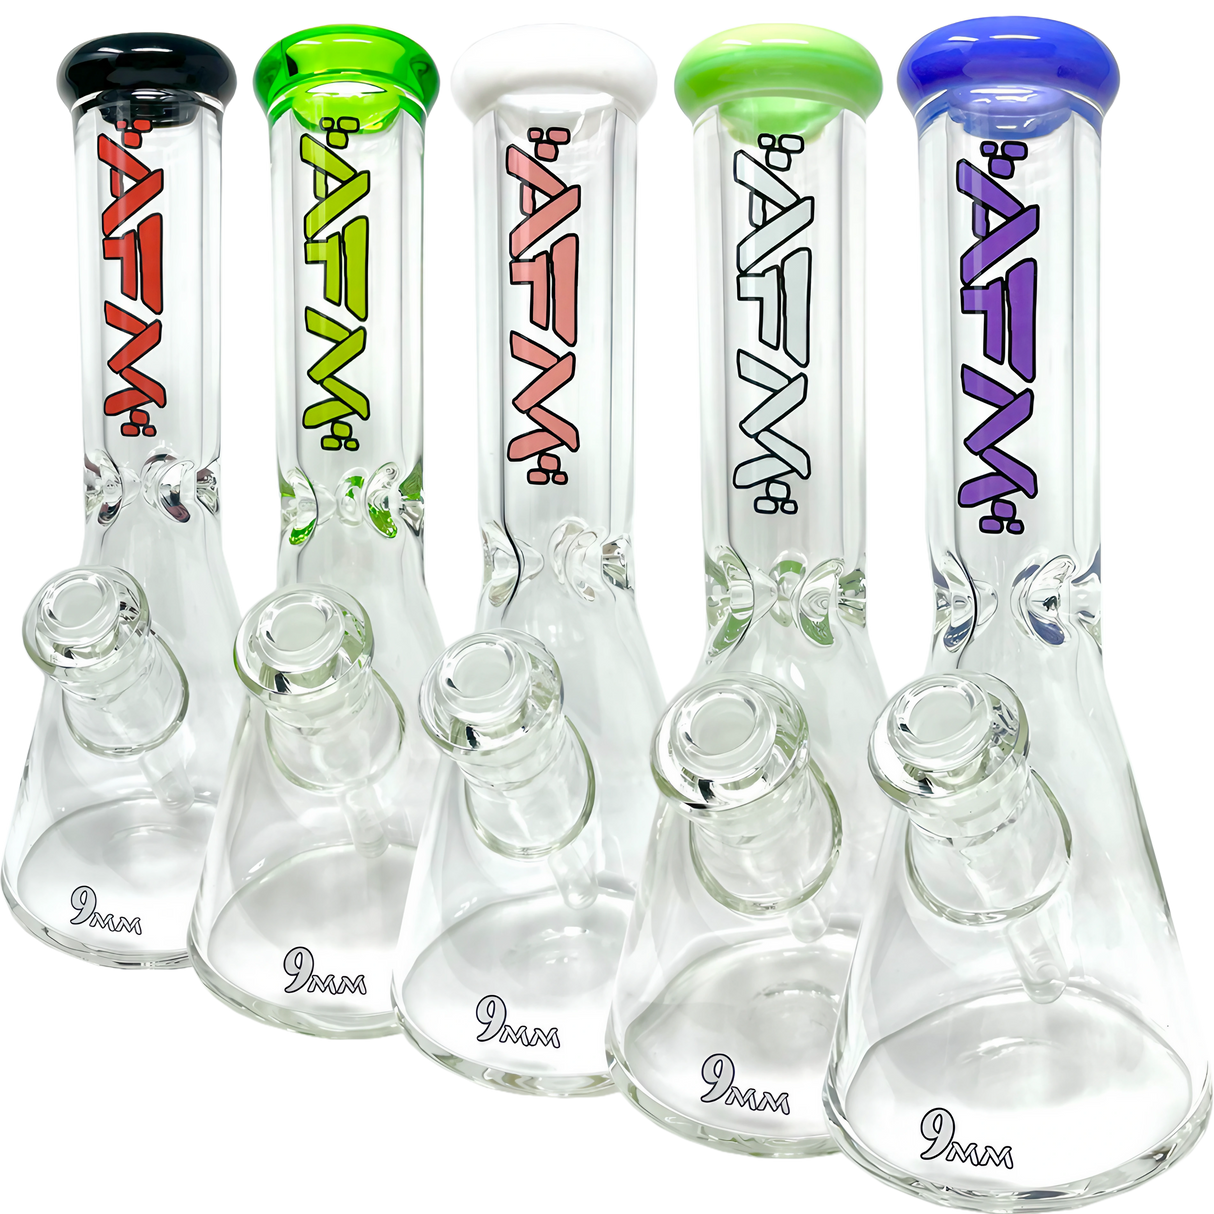 AFM The Heavy Boi Beaker Bongs with Colored Lips, 9mm Thick Borosilicate Glass, 12" Tall